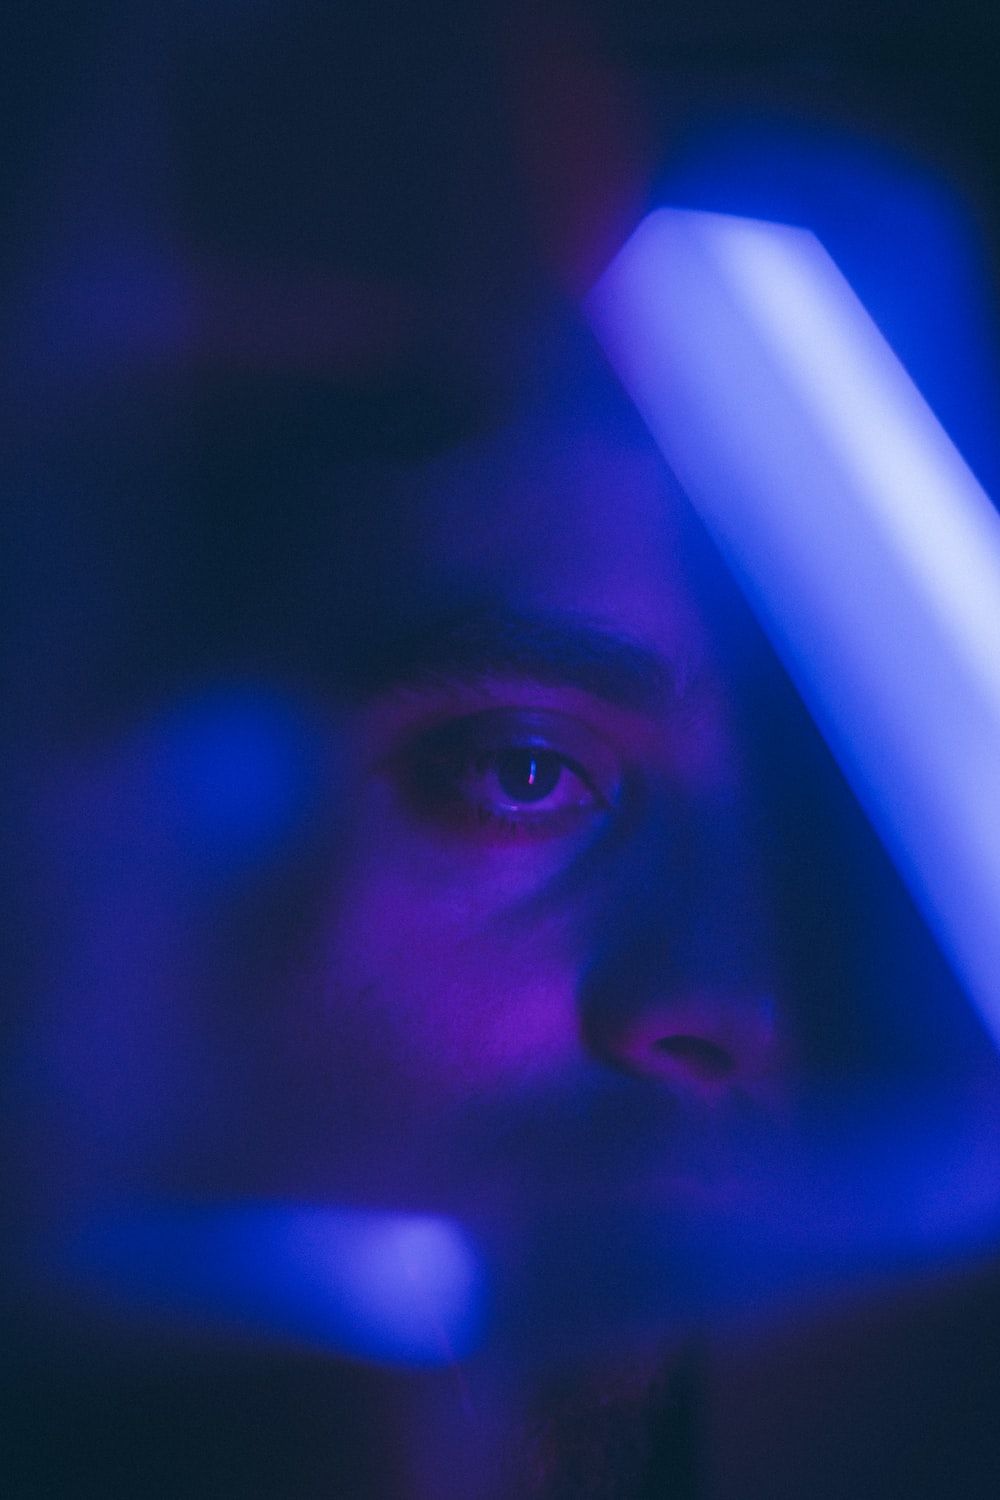 A man with a blue light in front of his face - Dark blue